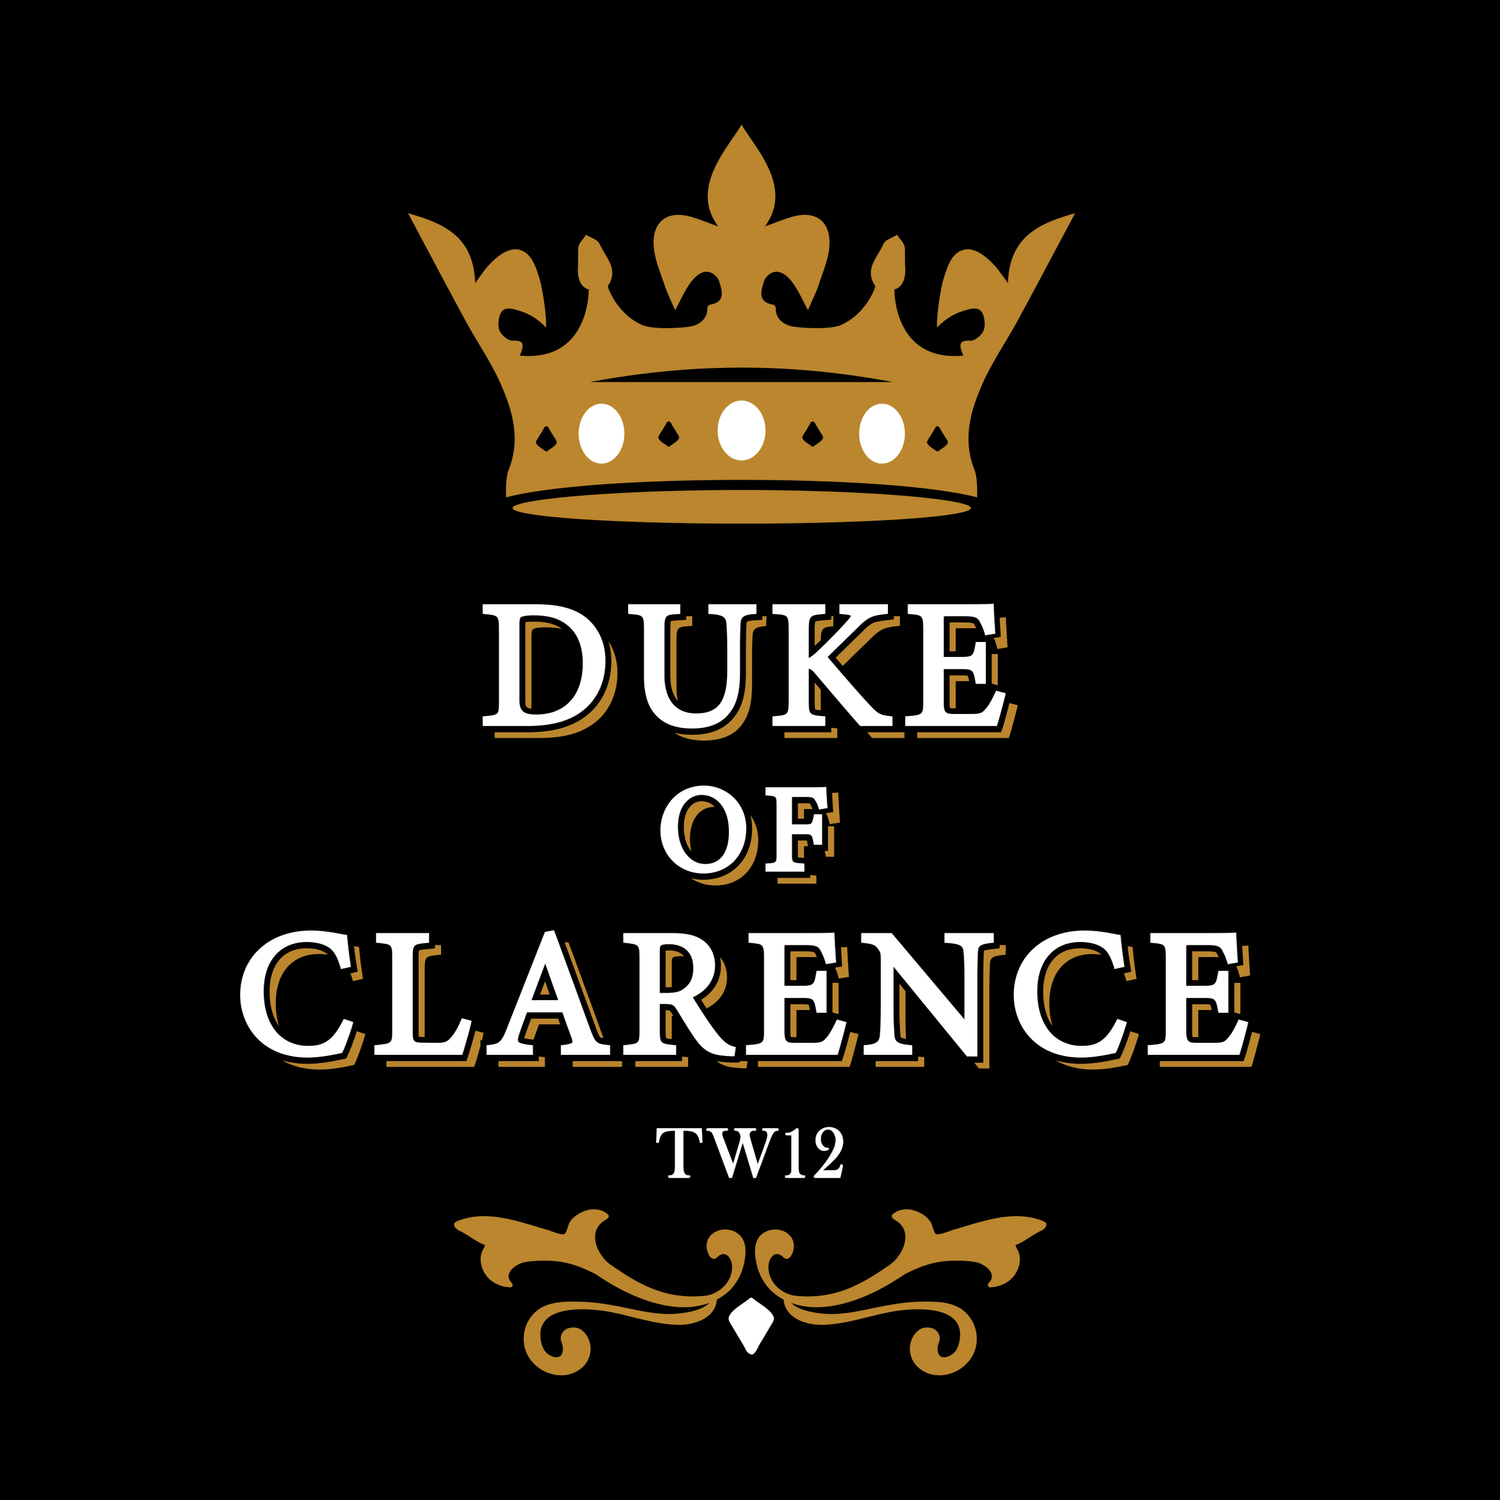 Duke of Clarence TW12